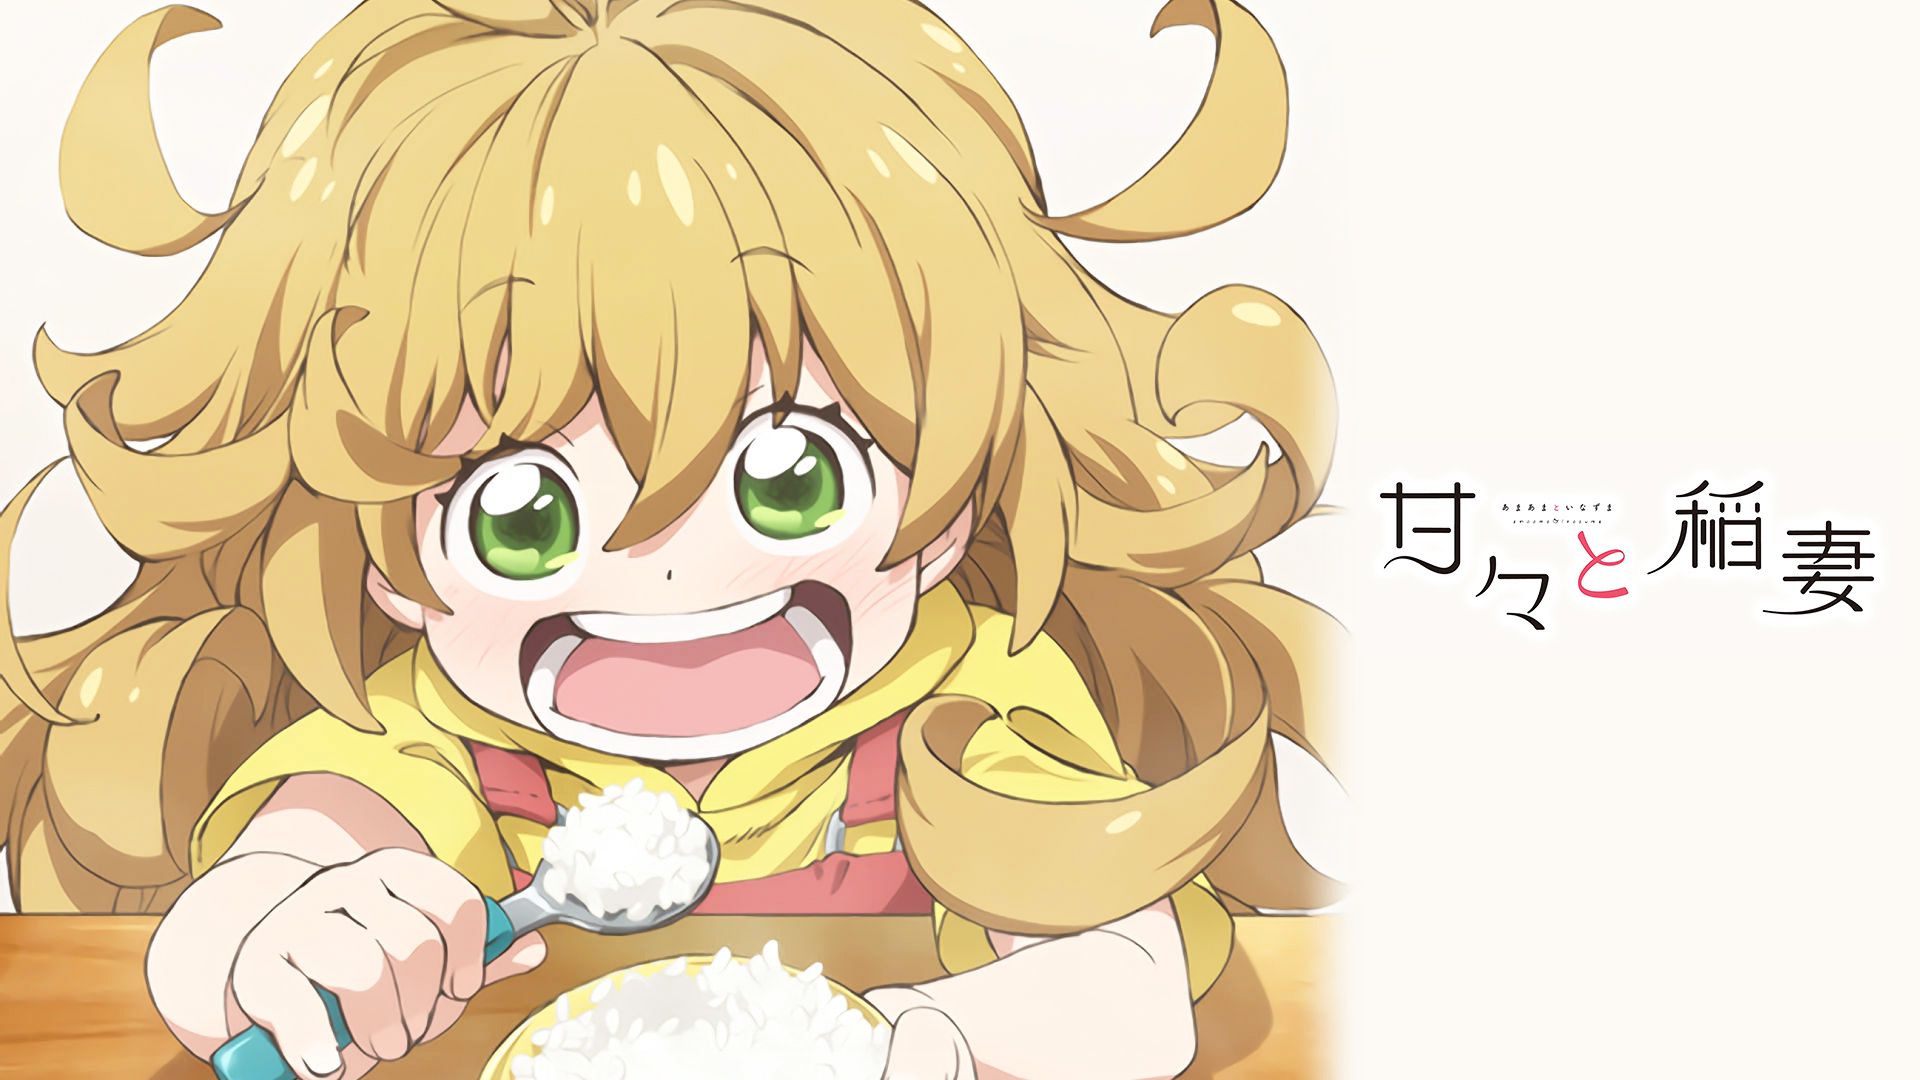 Anime Sweetness and Lightning HD Wallpaper | Background Image